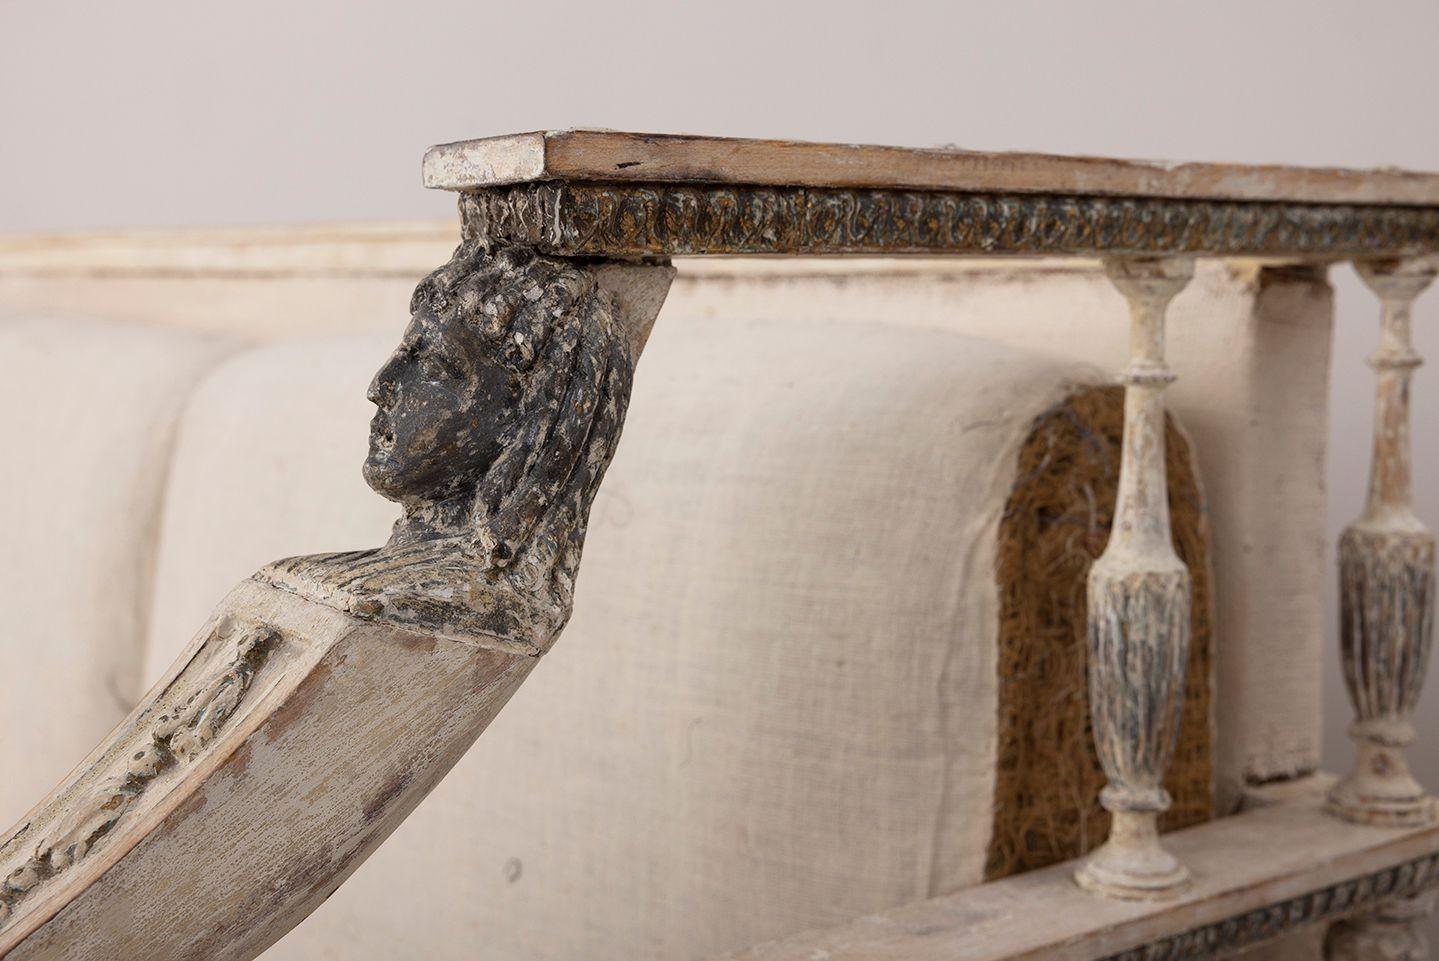 19th Century 19th c. Swedish Gustavian Sofa Bench with Egyptian Carvings in Original Paint